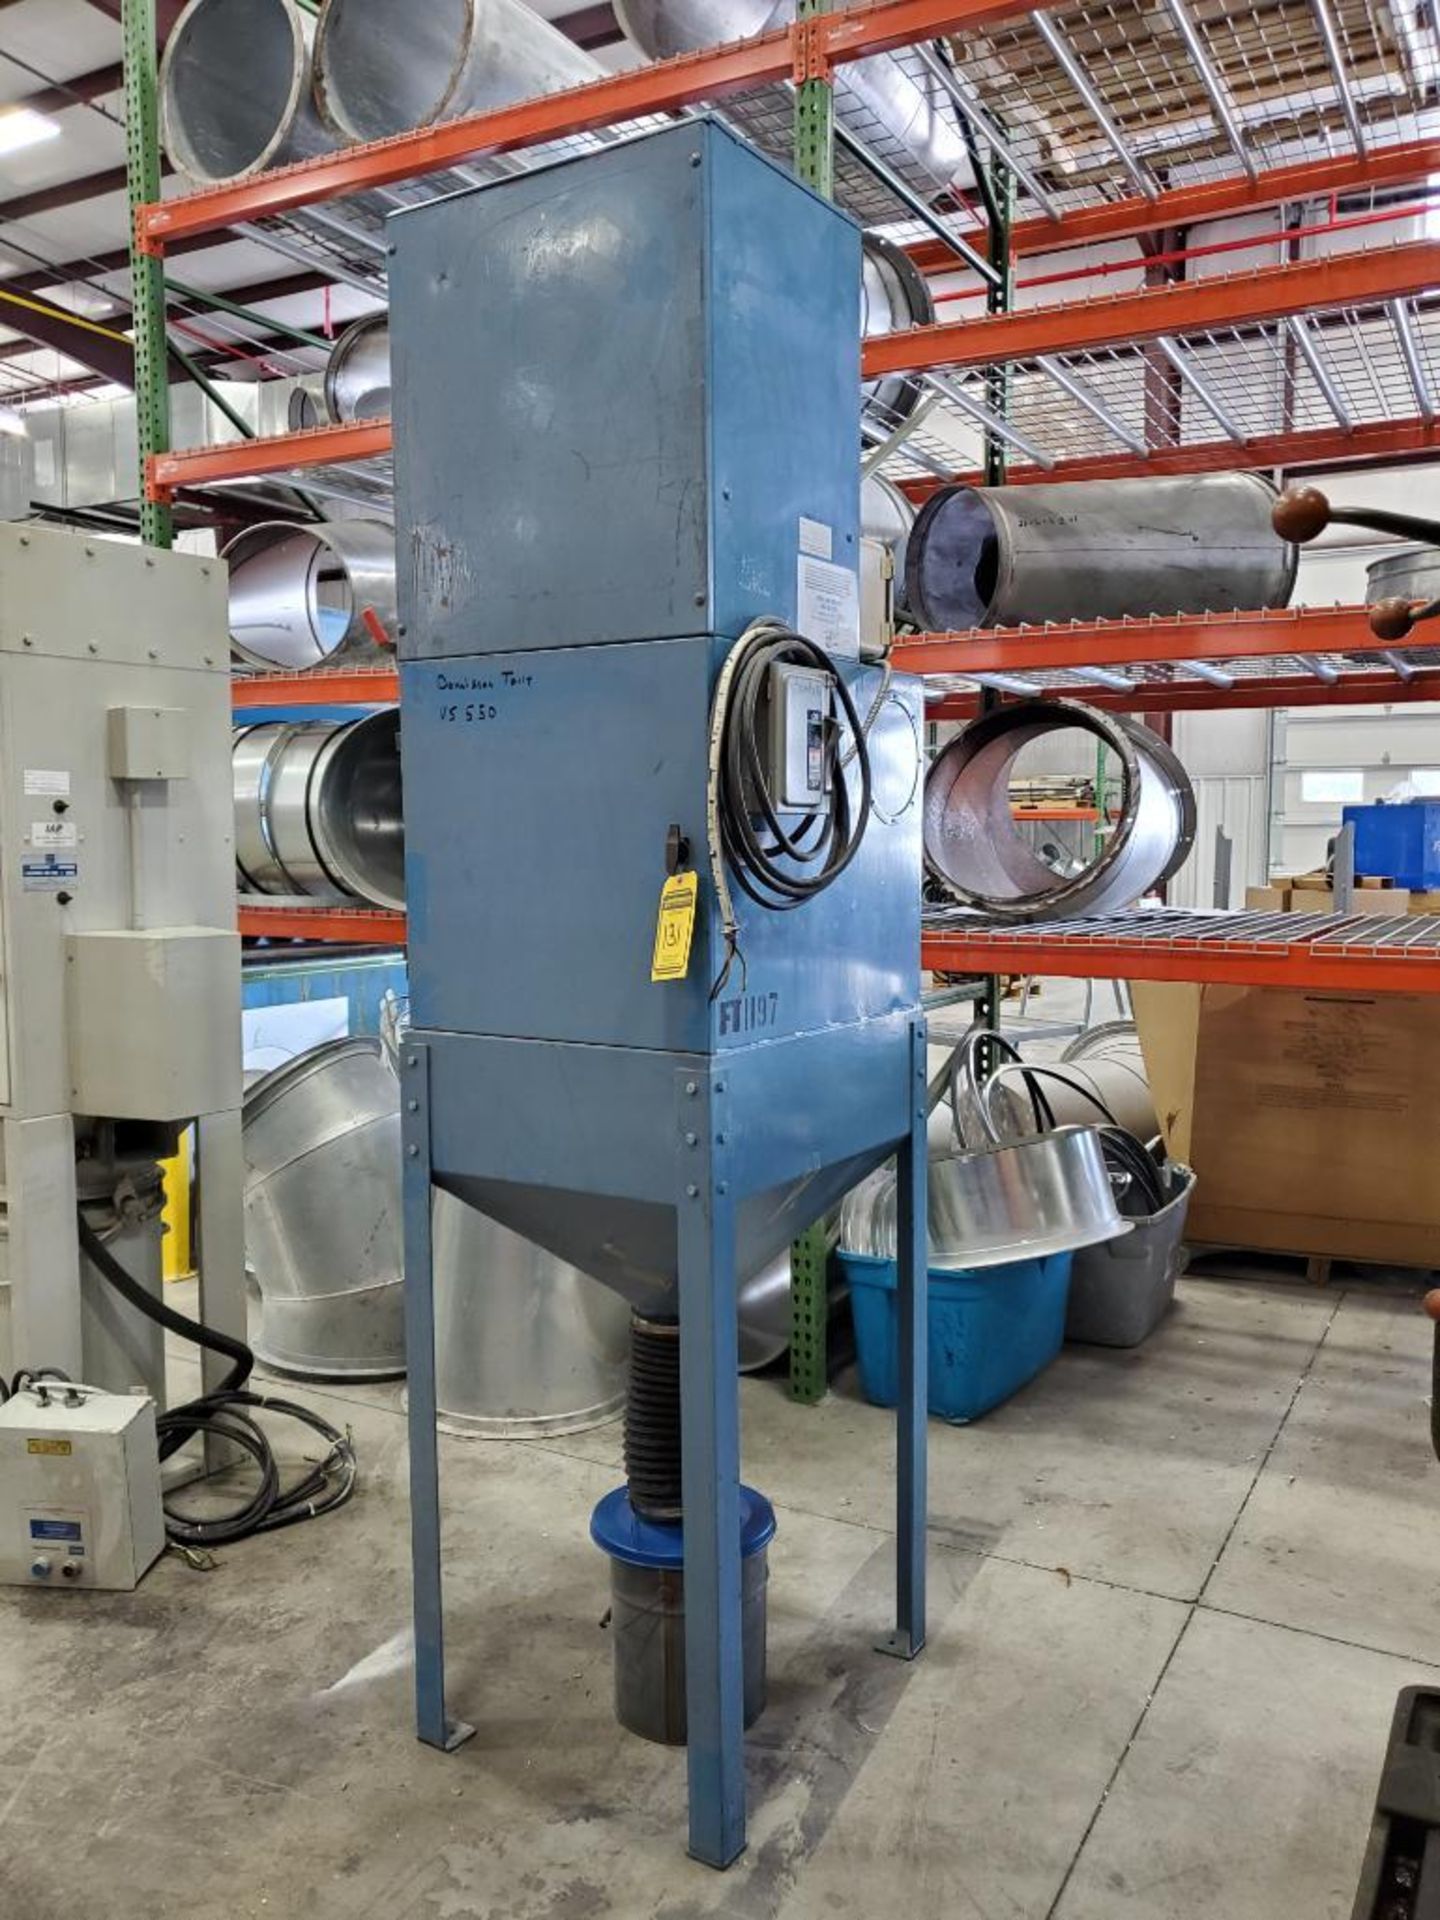 Donaldson Torit VS 550 Down Draft Dust Collector, Refurbished 4/21/21 - Image 2 of 6